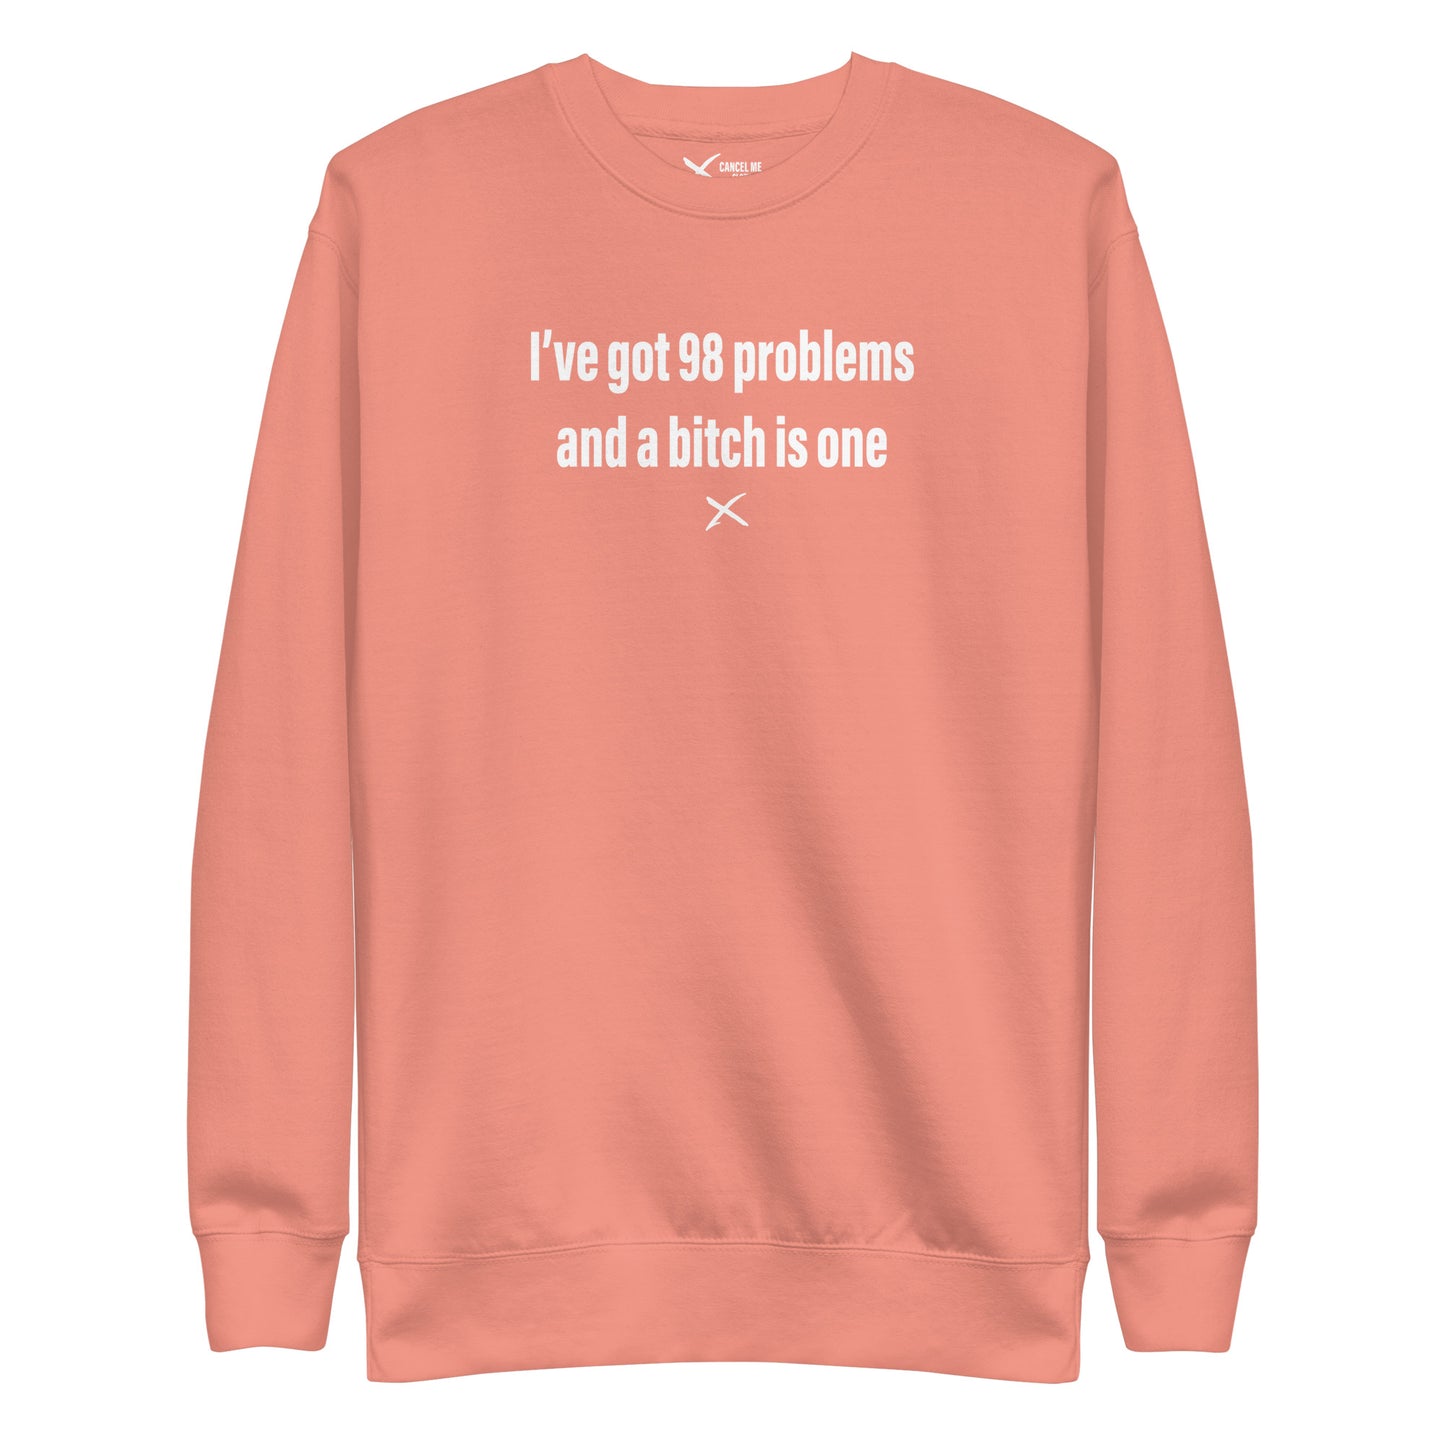 I've got 98 problems and a bitch is one - Sweatshirt